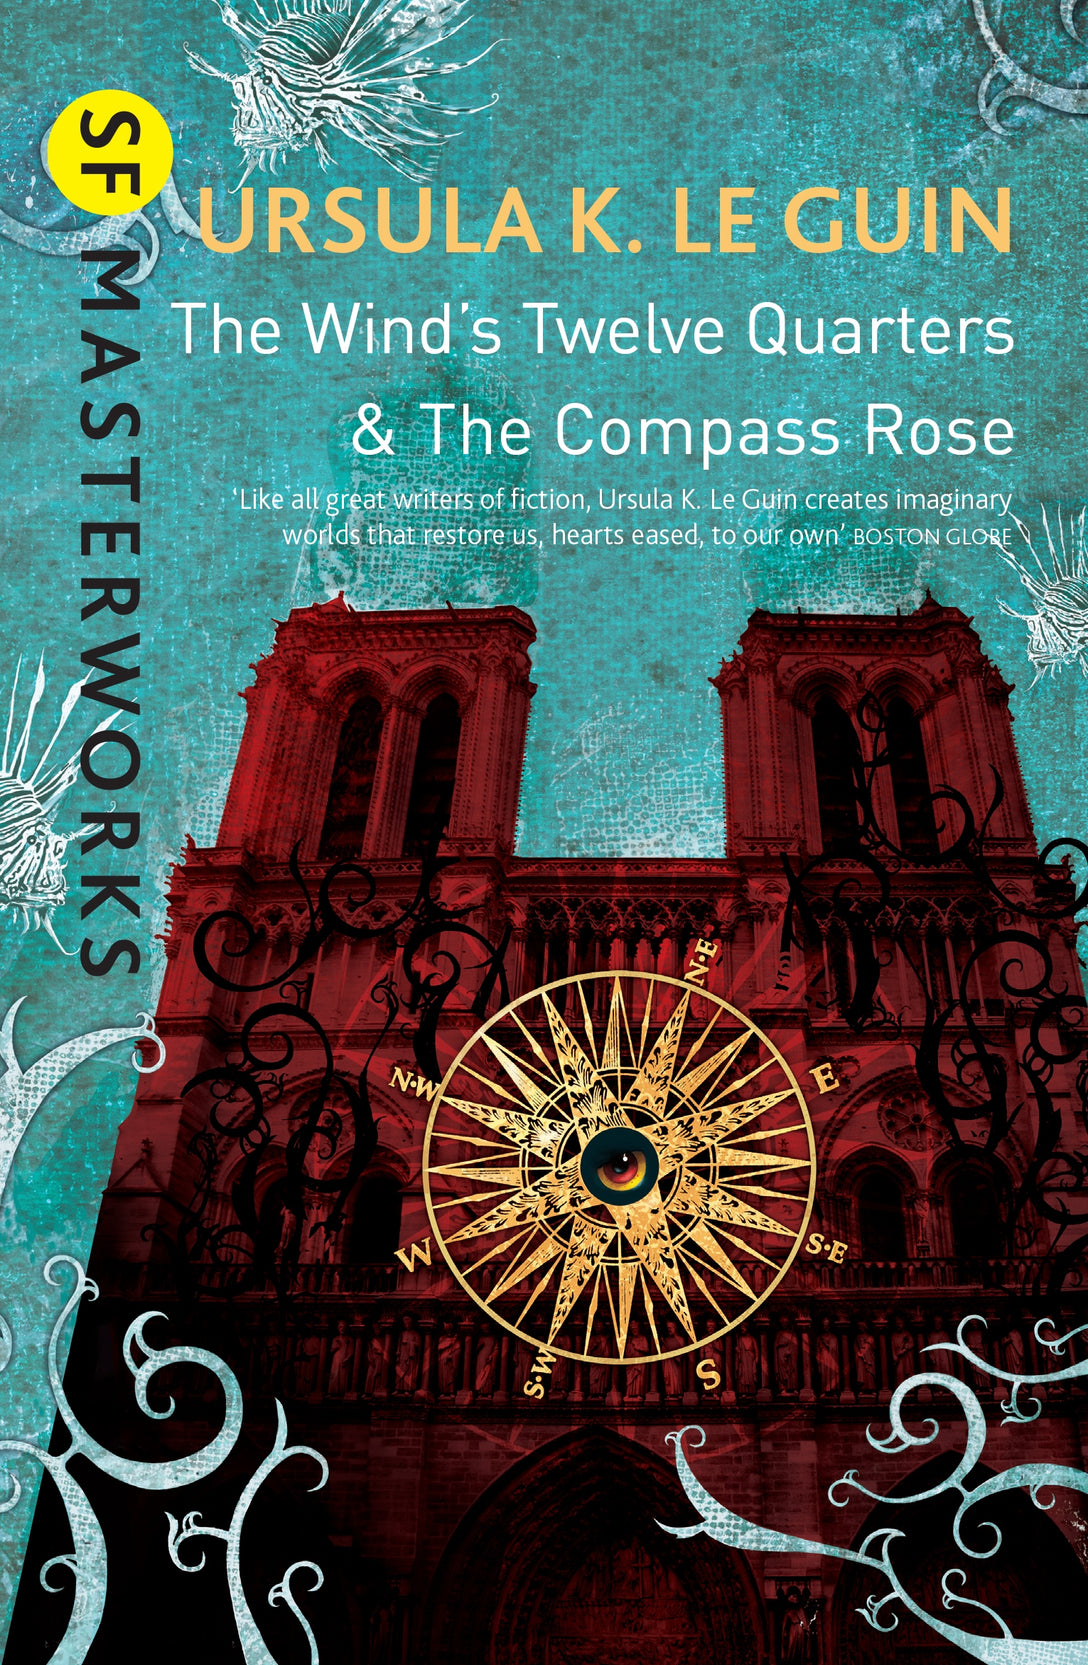 The Wind's Twelve Quarters and The Compass Rose by Ursula K. Le Guin